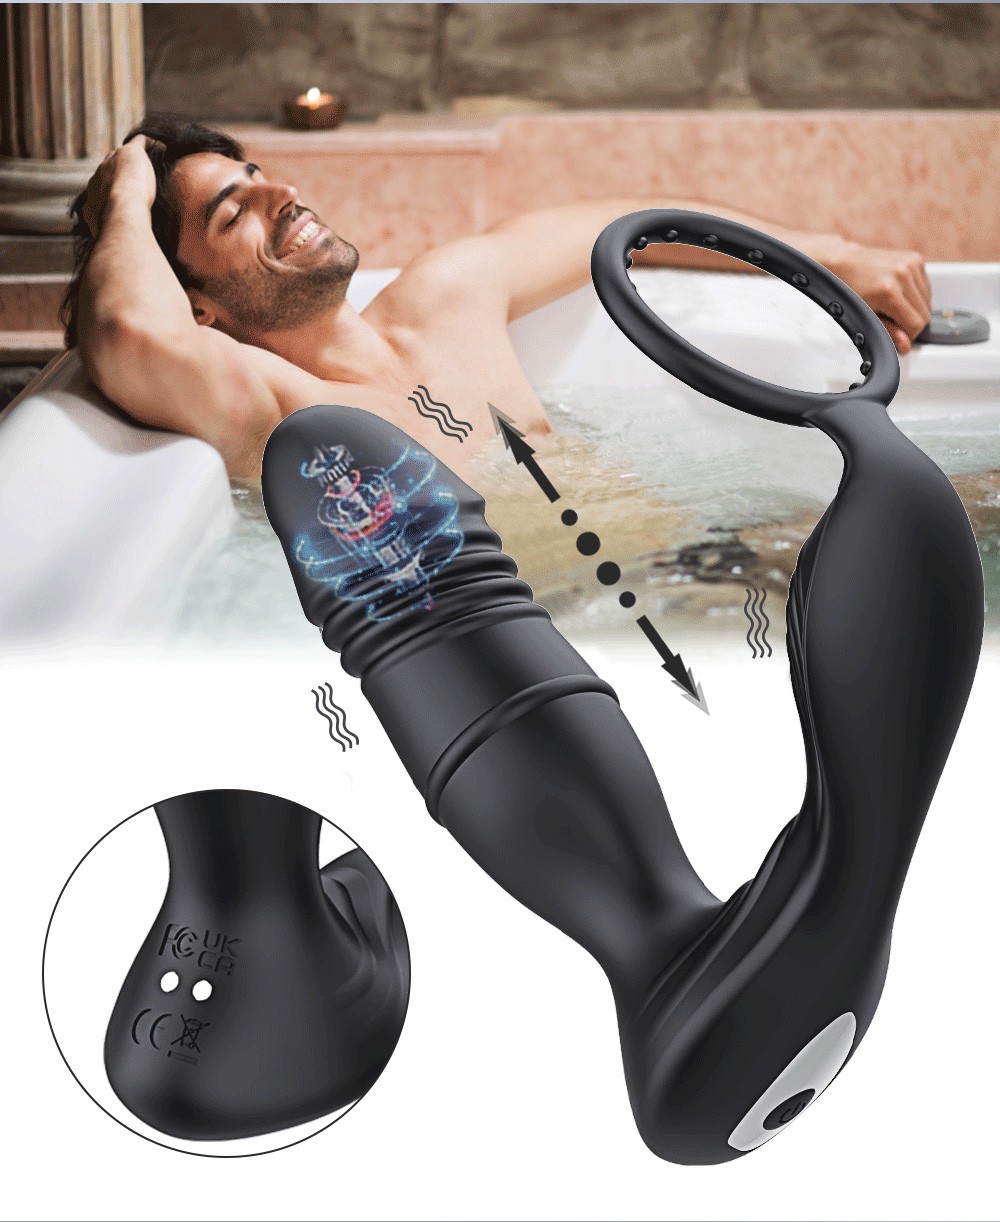 APP Controlled Thrusting Vibration Prostate Massagers ss